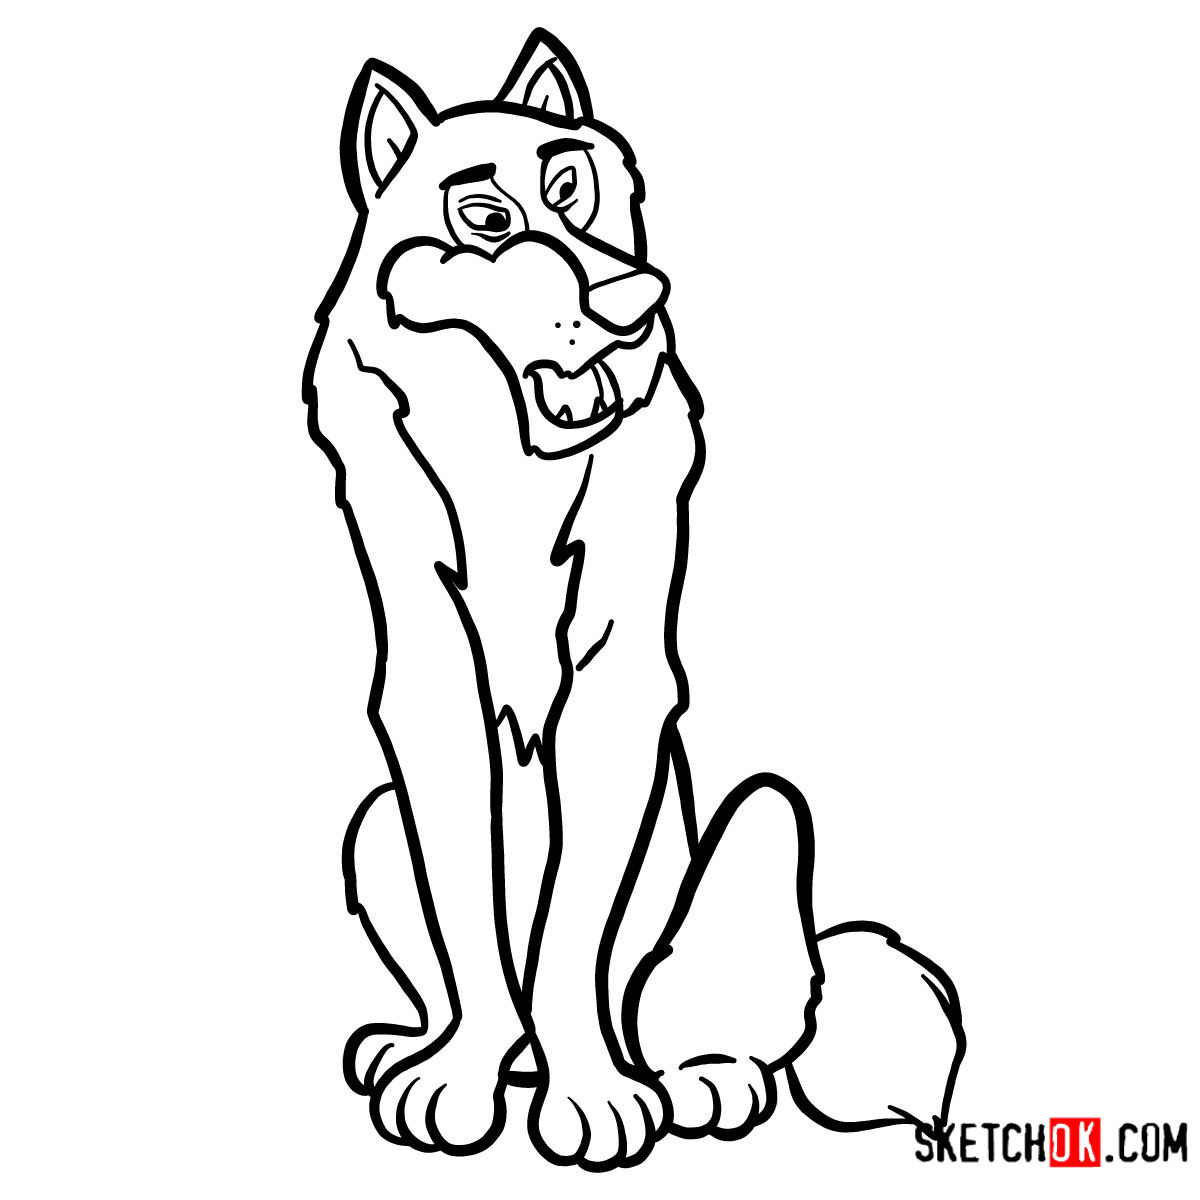 How to draw Akela from the Jungle Book - step 12